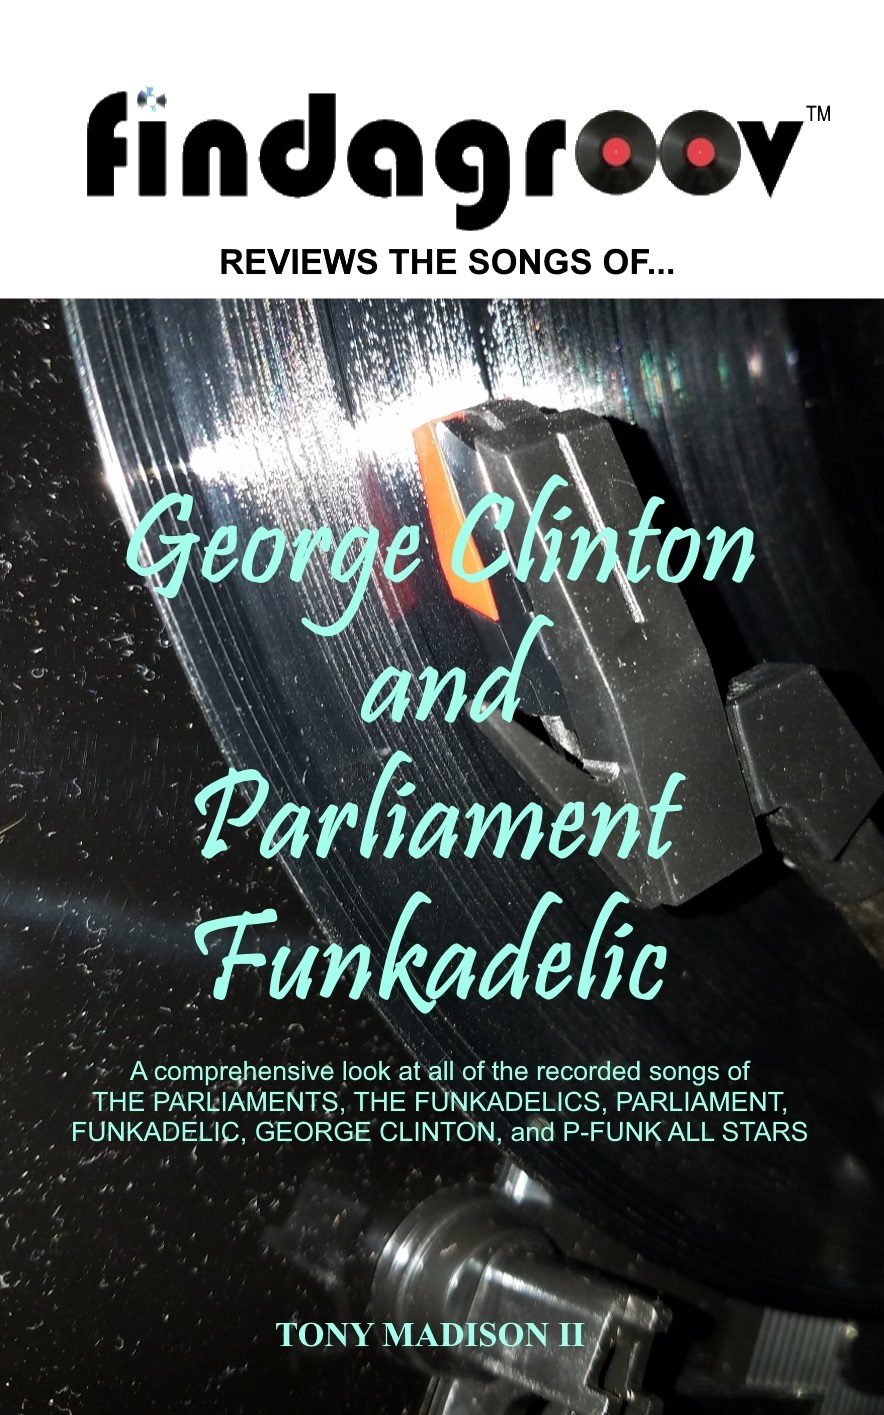 Buy Findagroov™ Reviews The Songs Of... George Clinton and Parliament Funkadelic on Amazon